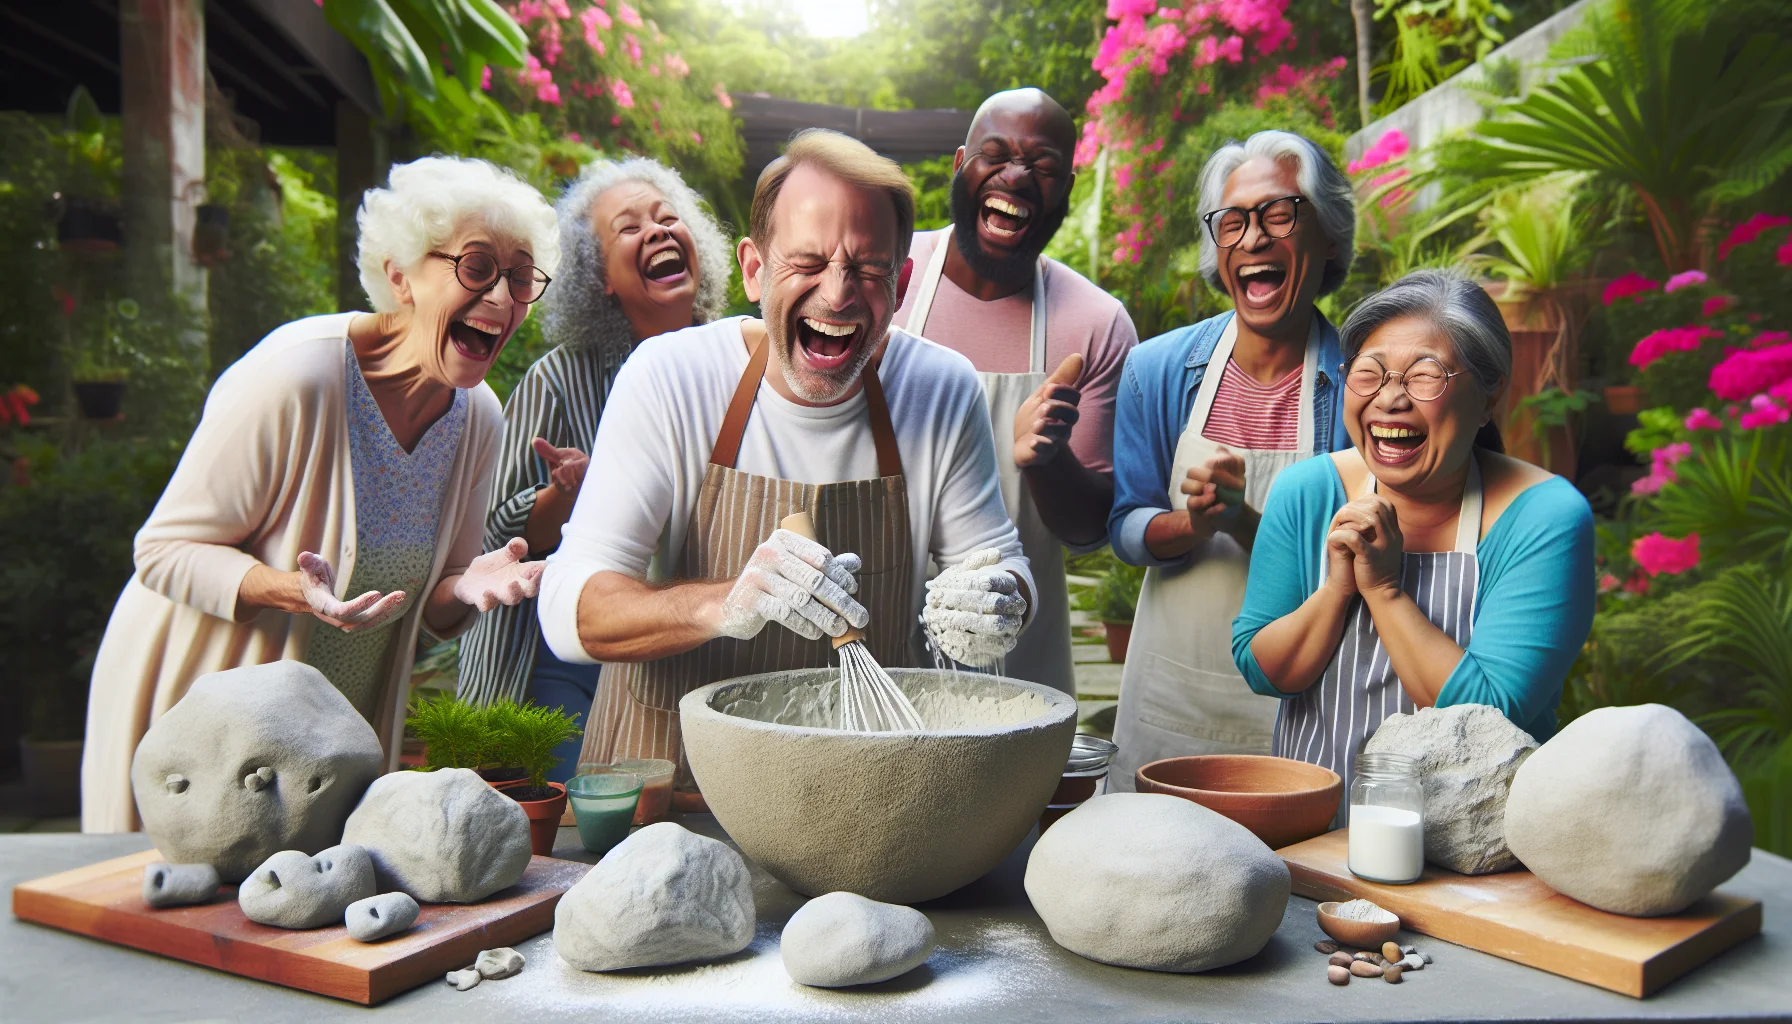 Create a charming, light-hearted scene of a faux rock recipe tutorial happening in a lush garden setting. The instructor, an enthusiastic middle-aged Caucasian man, is demonstrating the process with humor, joyfully mixing and shaping the concoction into whimsical stone shapes. Interested onlookers, a diverse mixture of an elderly Hispanic woman, a young Black man, and a South Asian child, are laughing heartily, trying out the recipe themselves by creating humorous, oversized rocks. The quirky rocks, the shared laughter, and the vibrant garden in the backdrop evoke a joyous atmosphere, conveying the idea that gardening can indeed be fun.